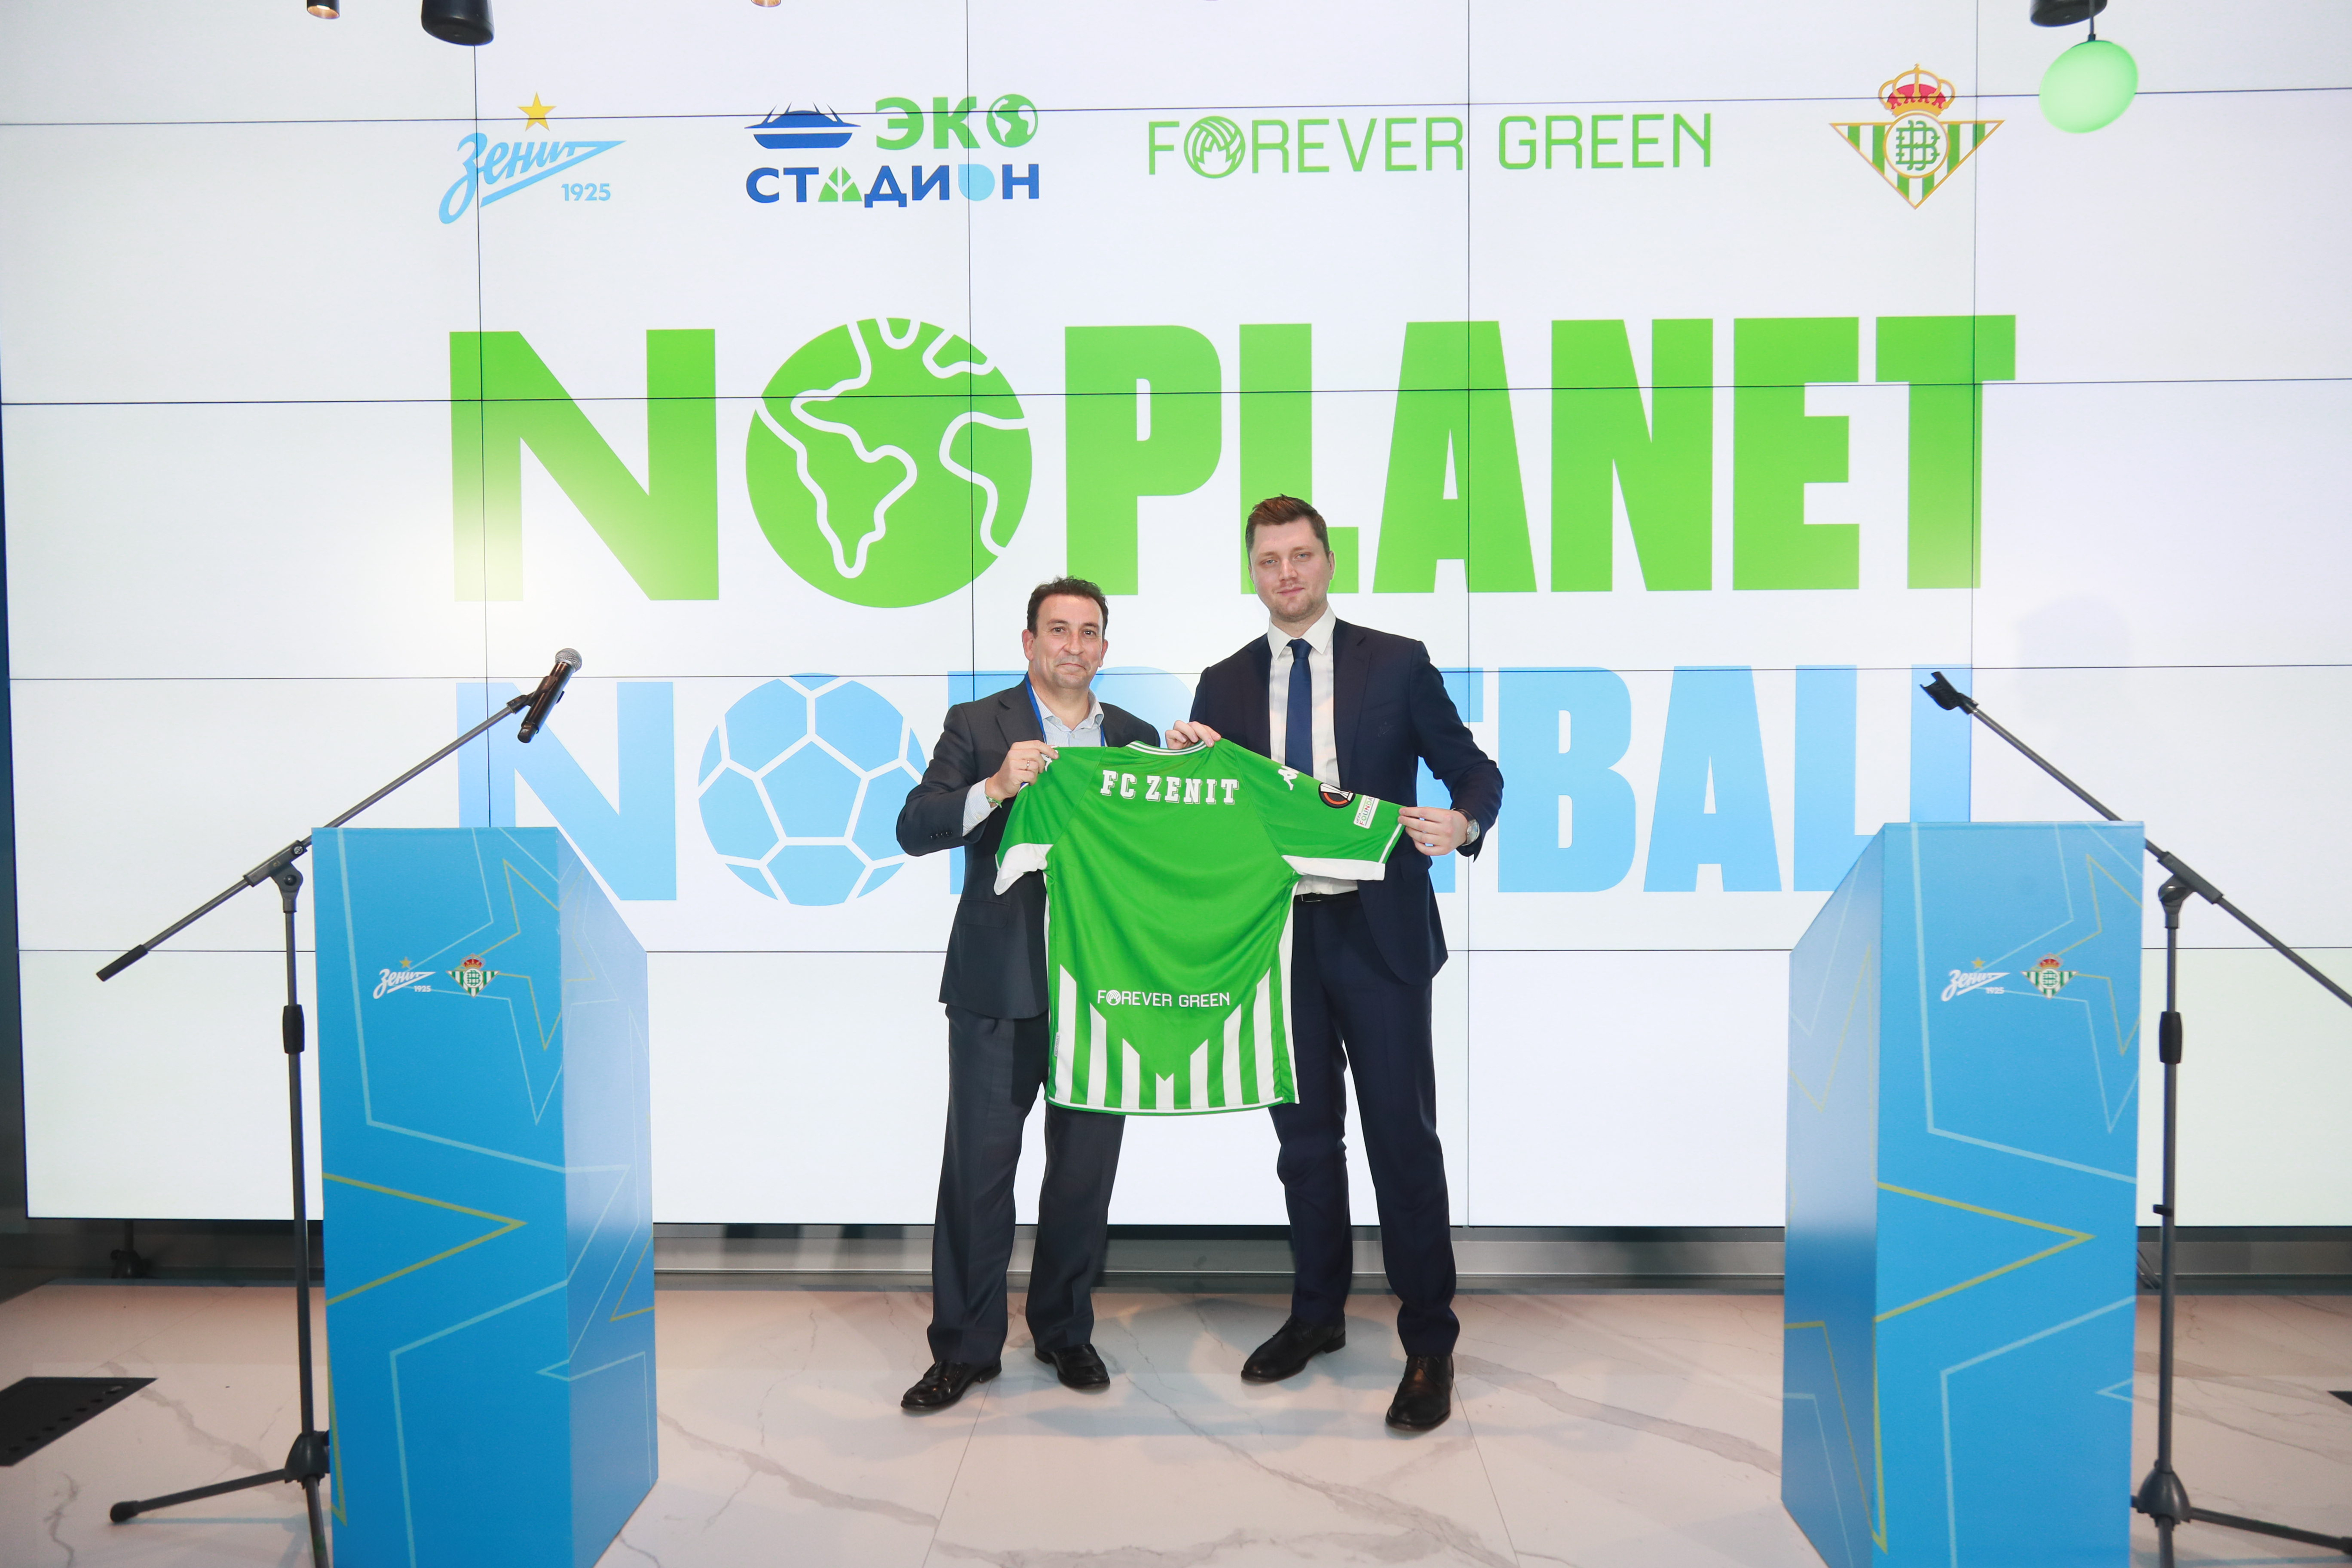 Zenit and Real Betis join forces to protect the environment and work towards sustainable development